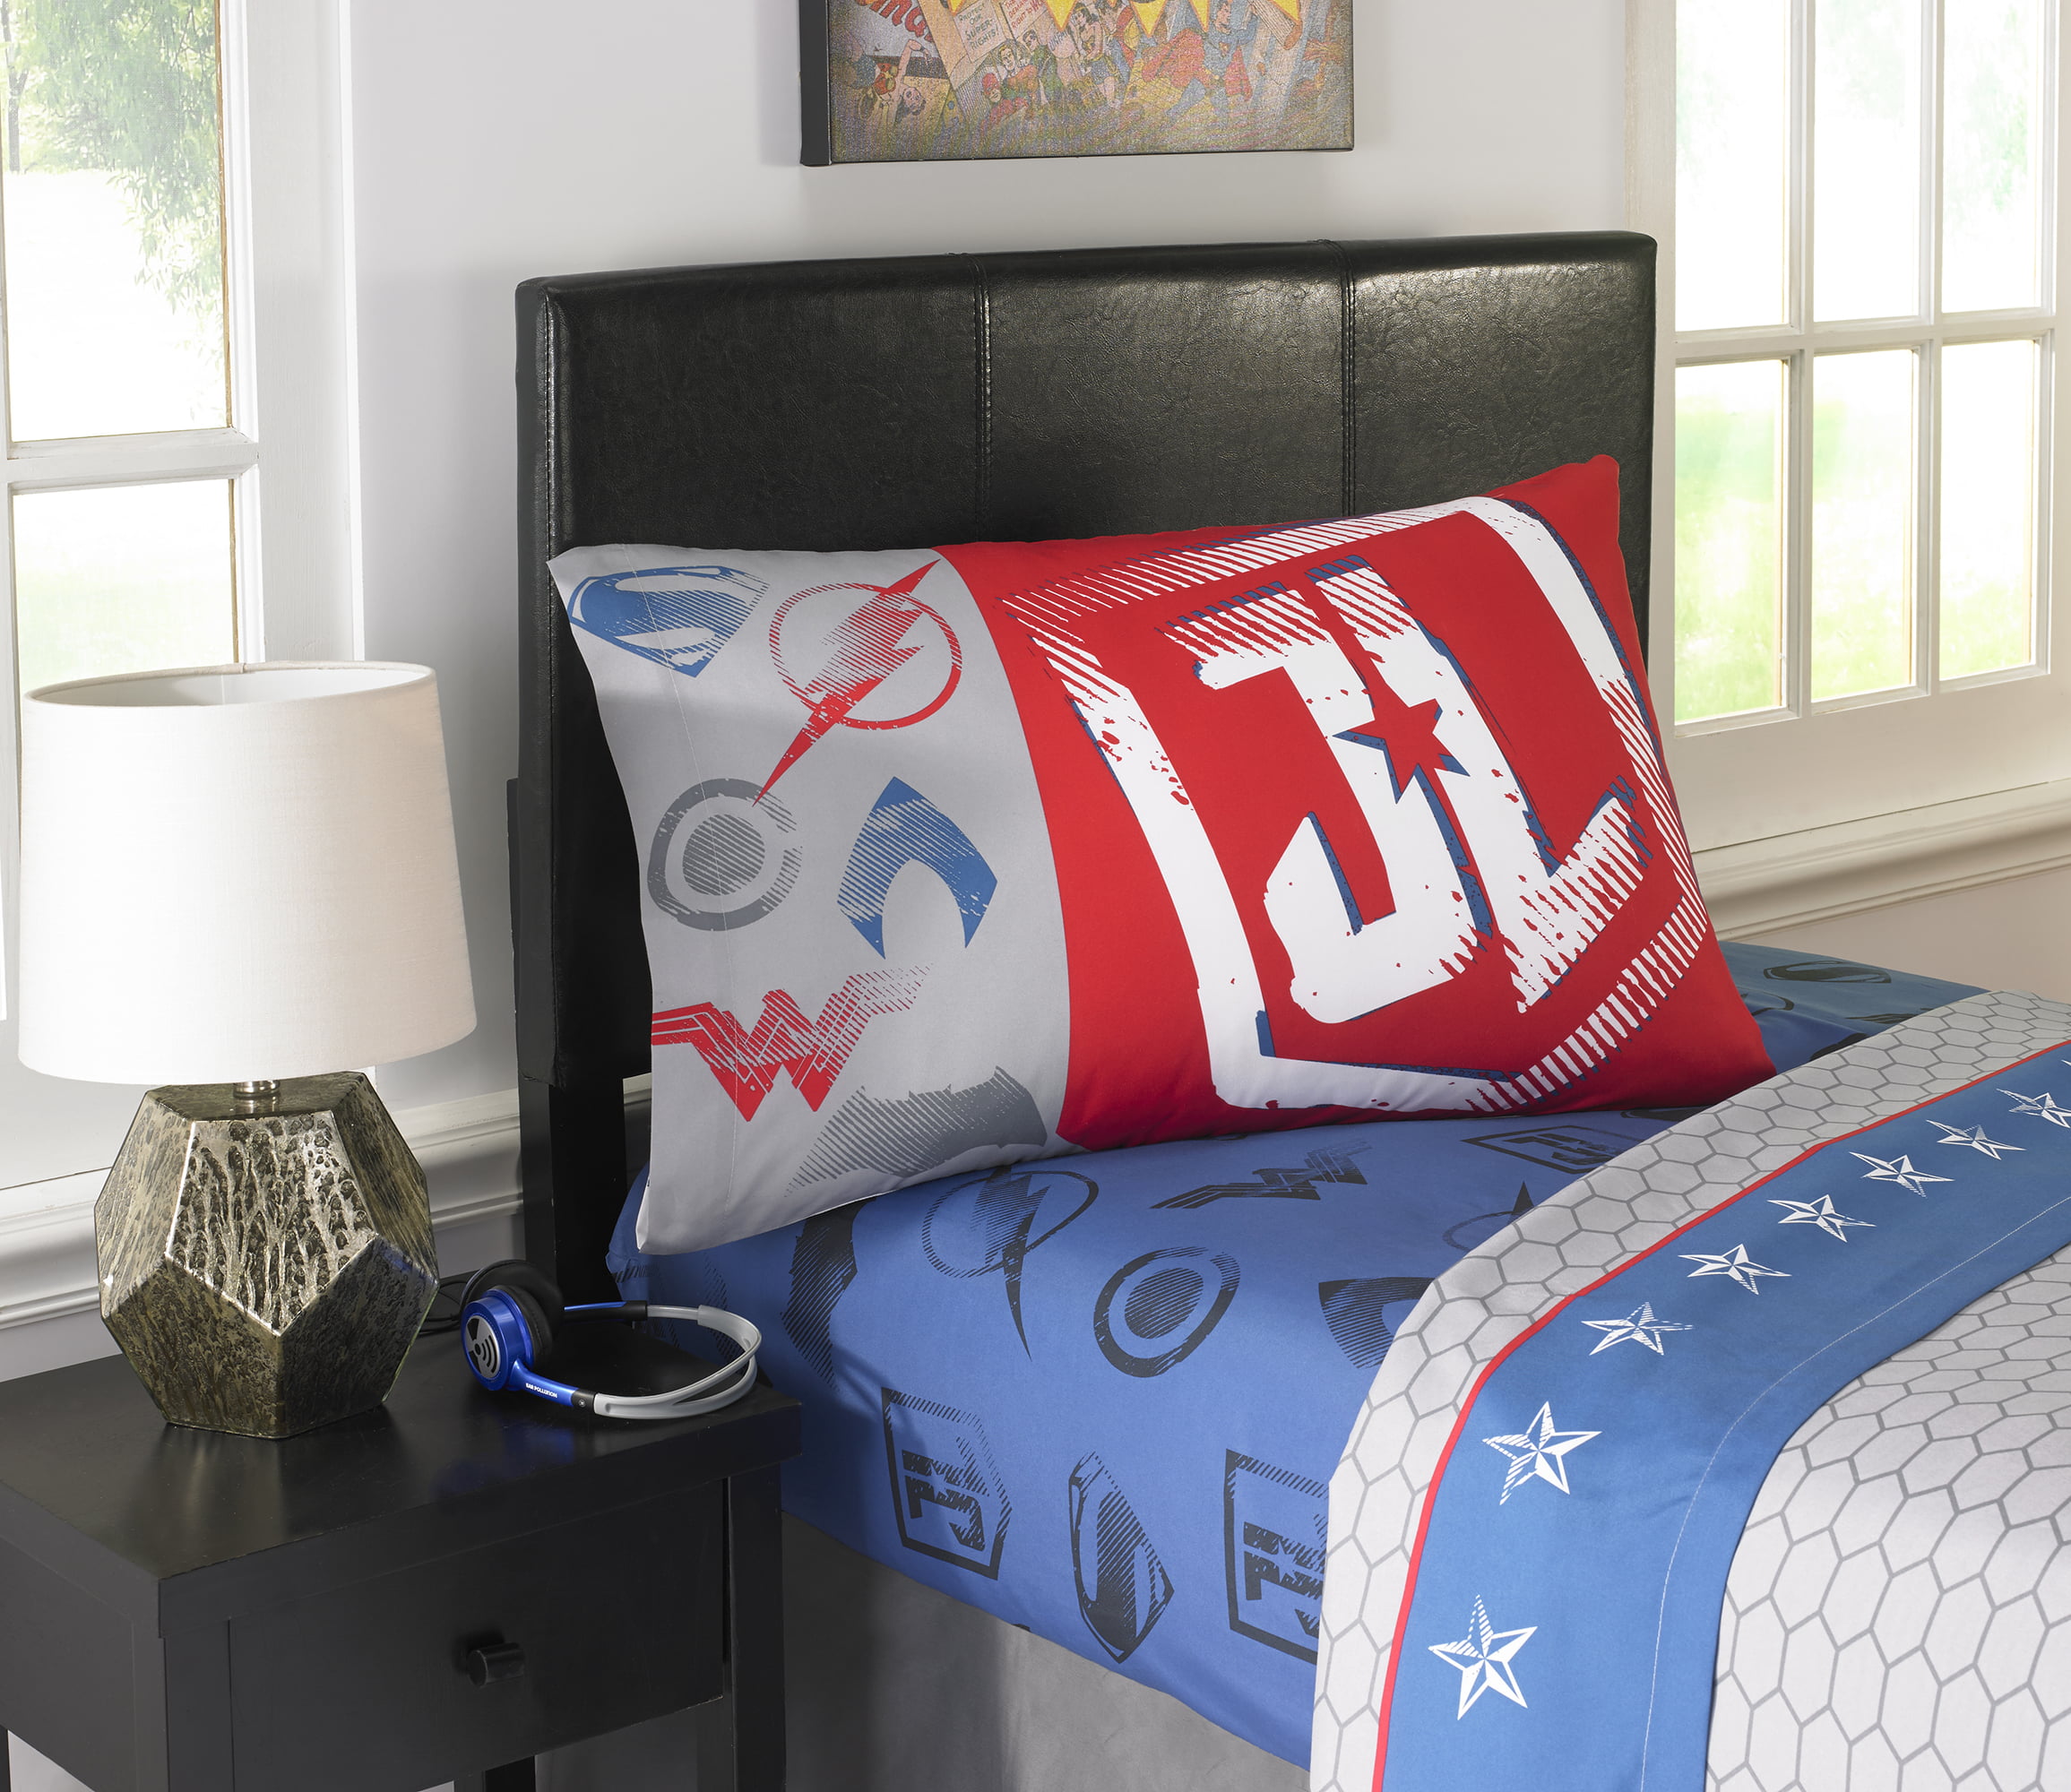 Details about   New Justice League Full Size Bed Sheet Set 4 Piece Superhero Bedding MIcroFiber 